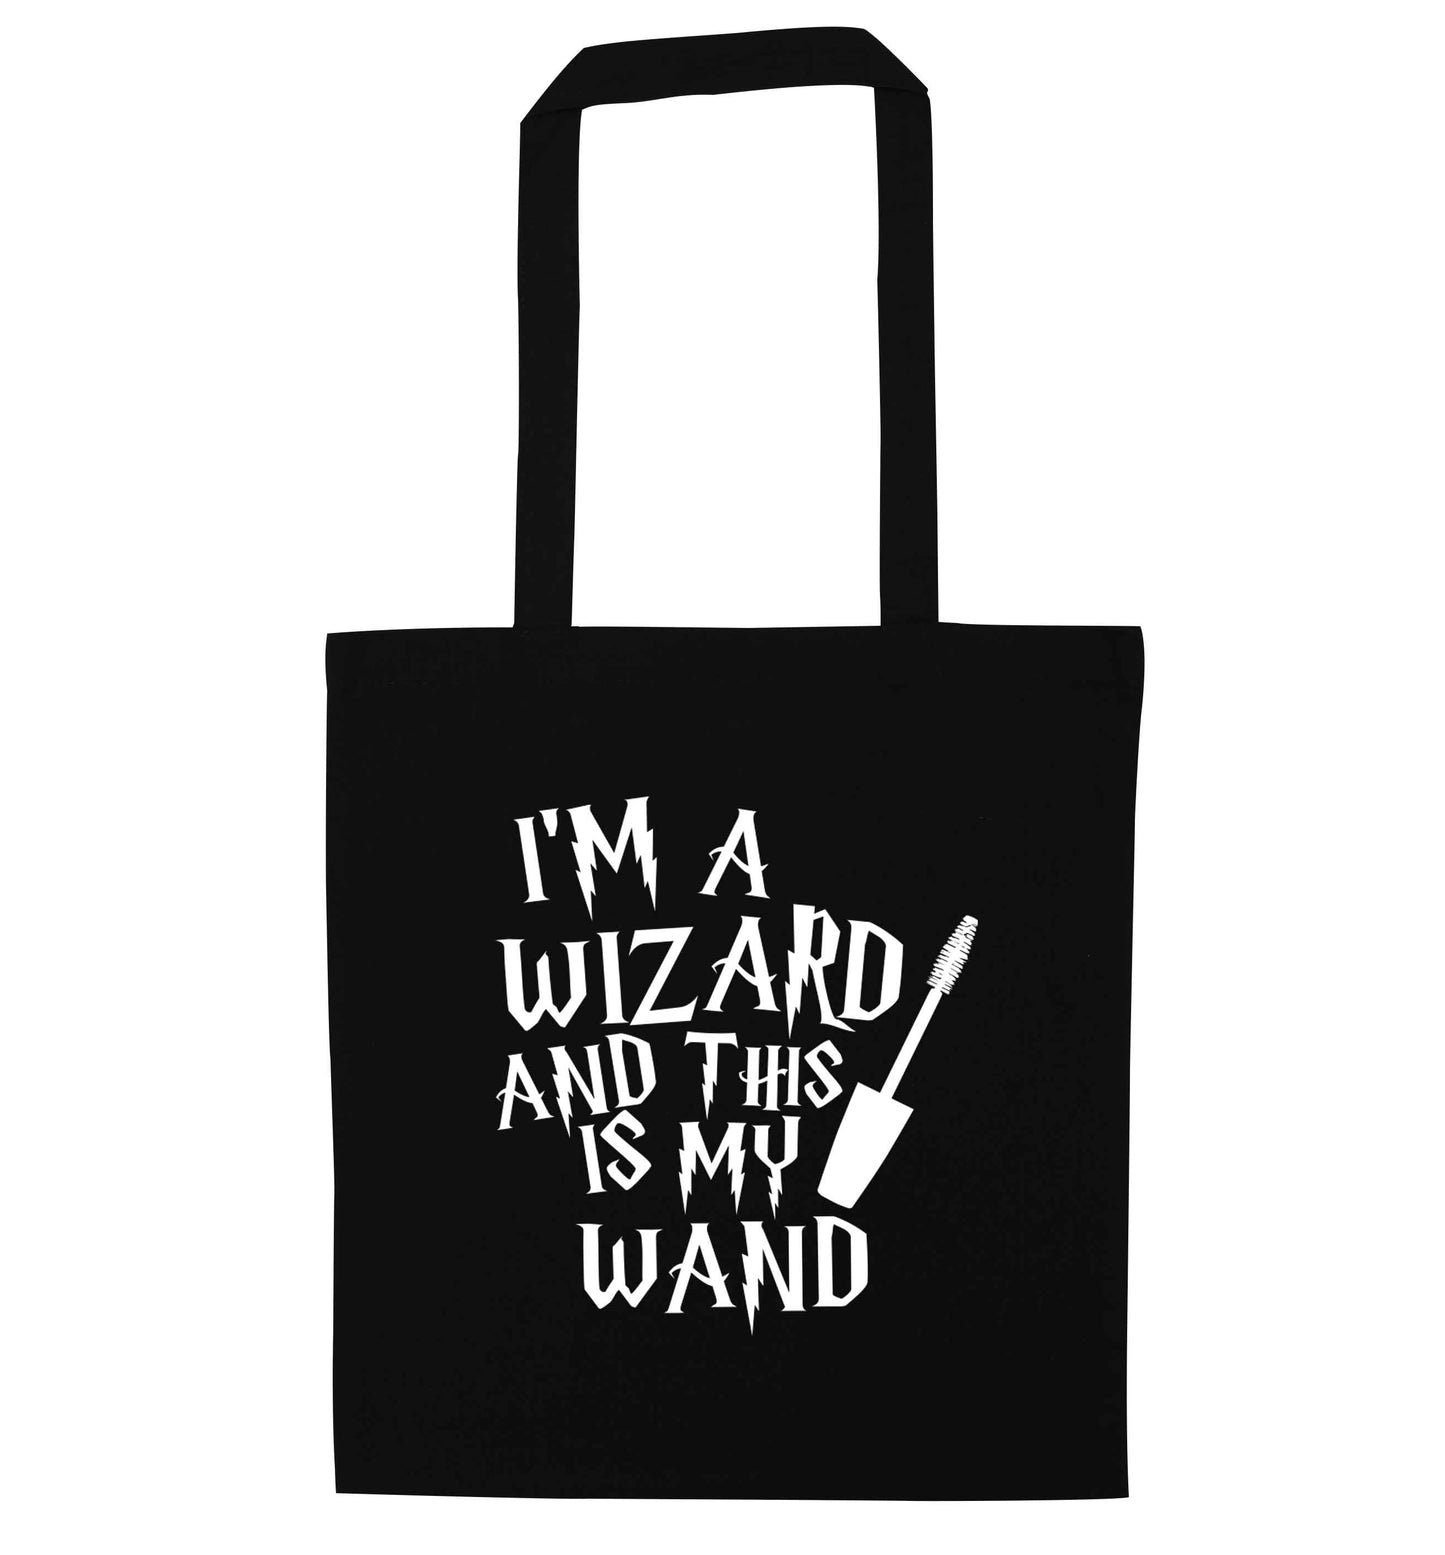 I'm a wizard and this is my wand black tote bag